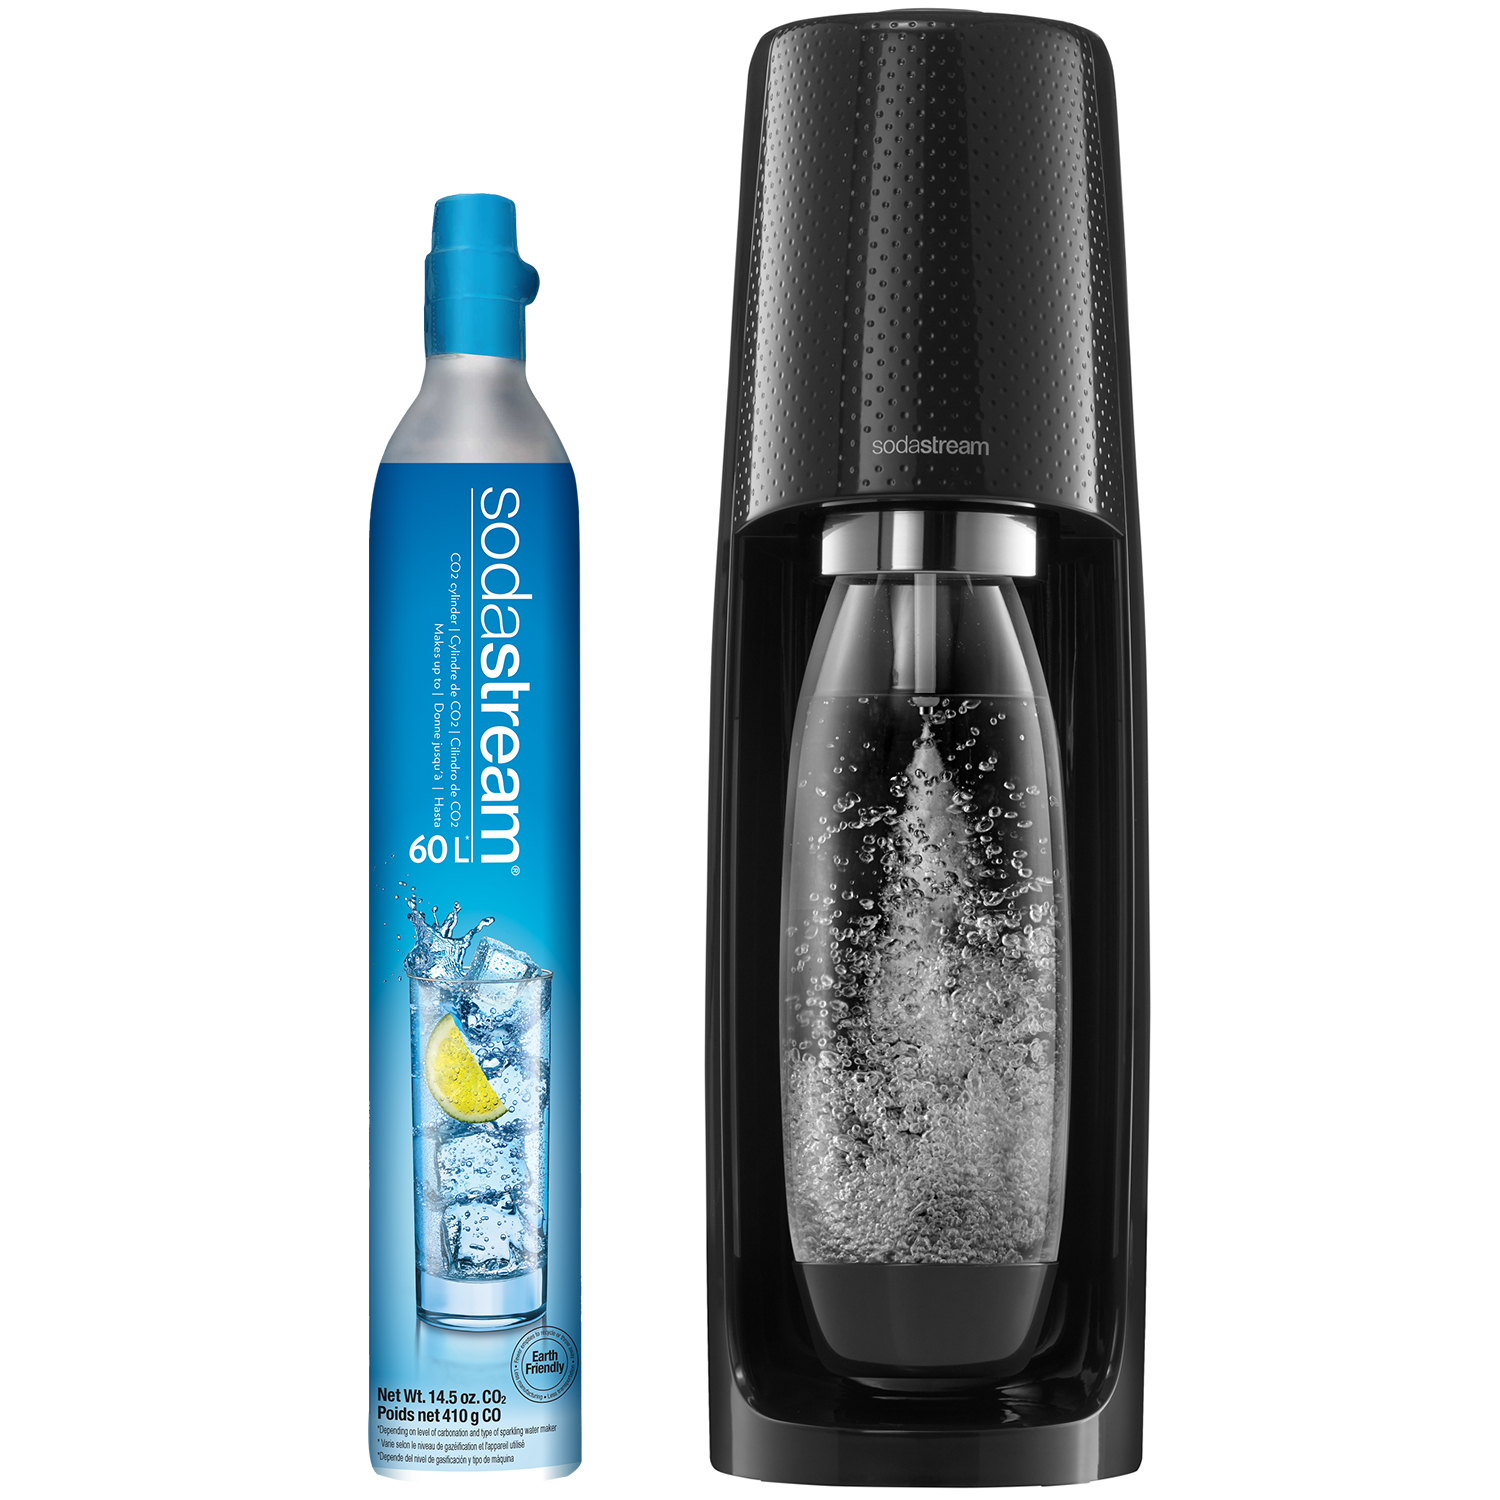 SodaStream Fizzi Sparkling Water Maker (Black) with CO2 and BPA Free Bottle - image 1 of 12